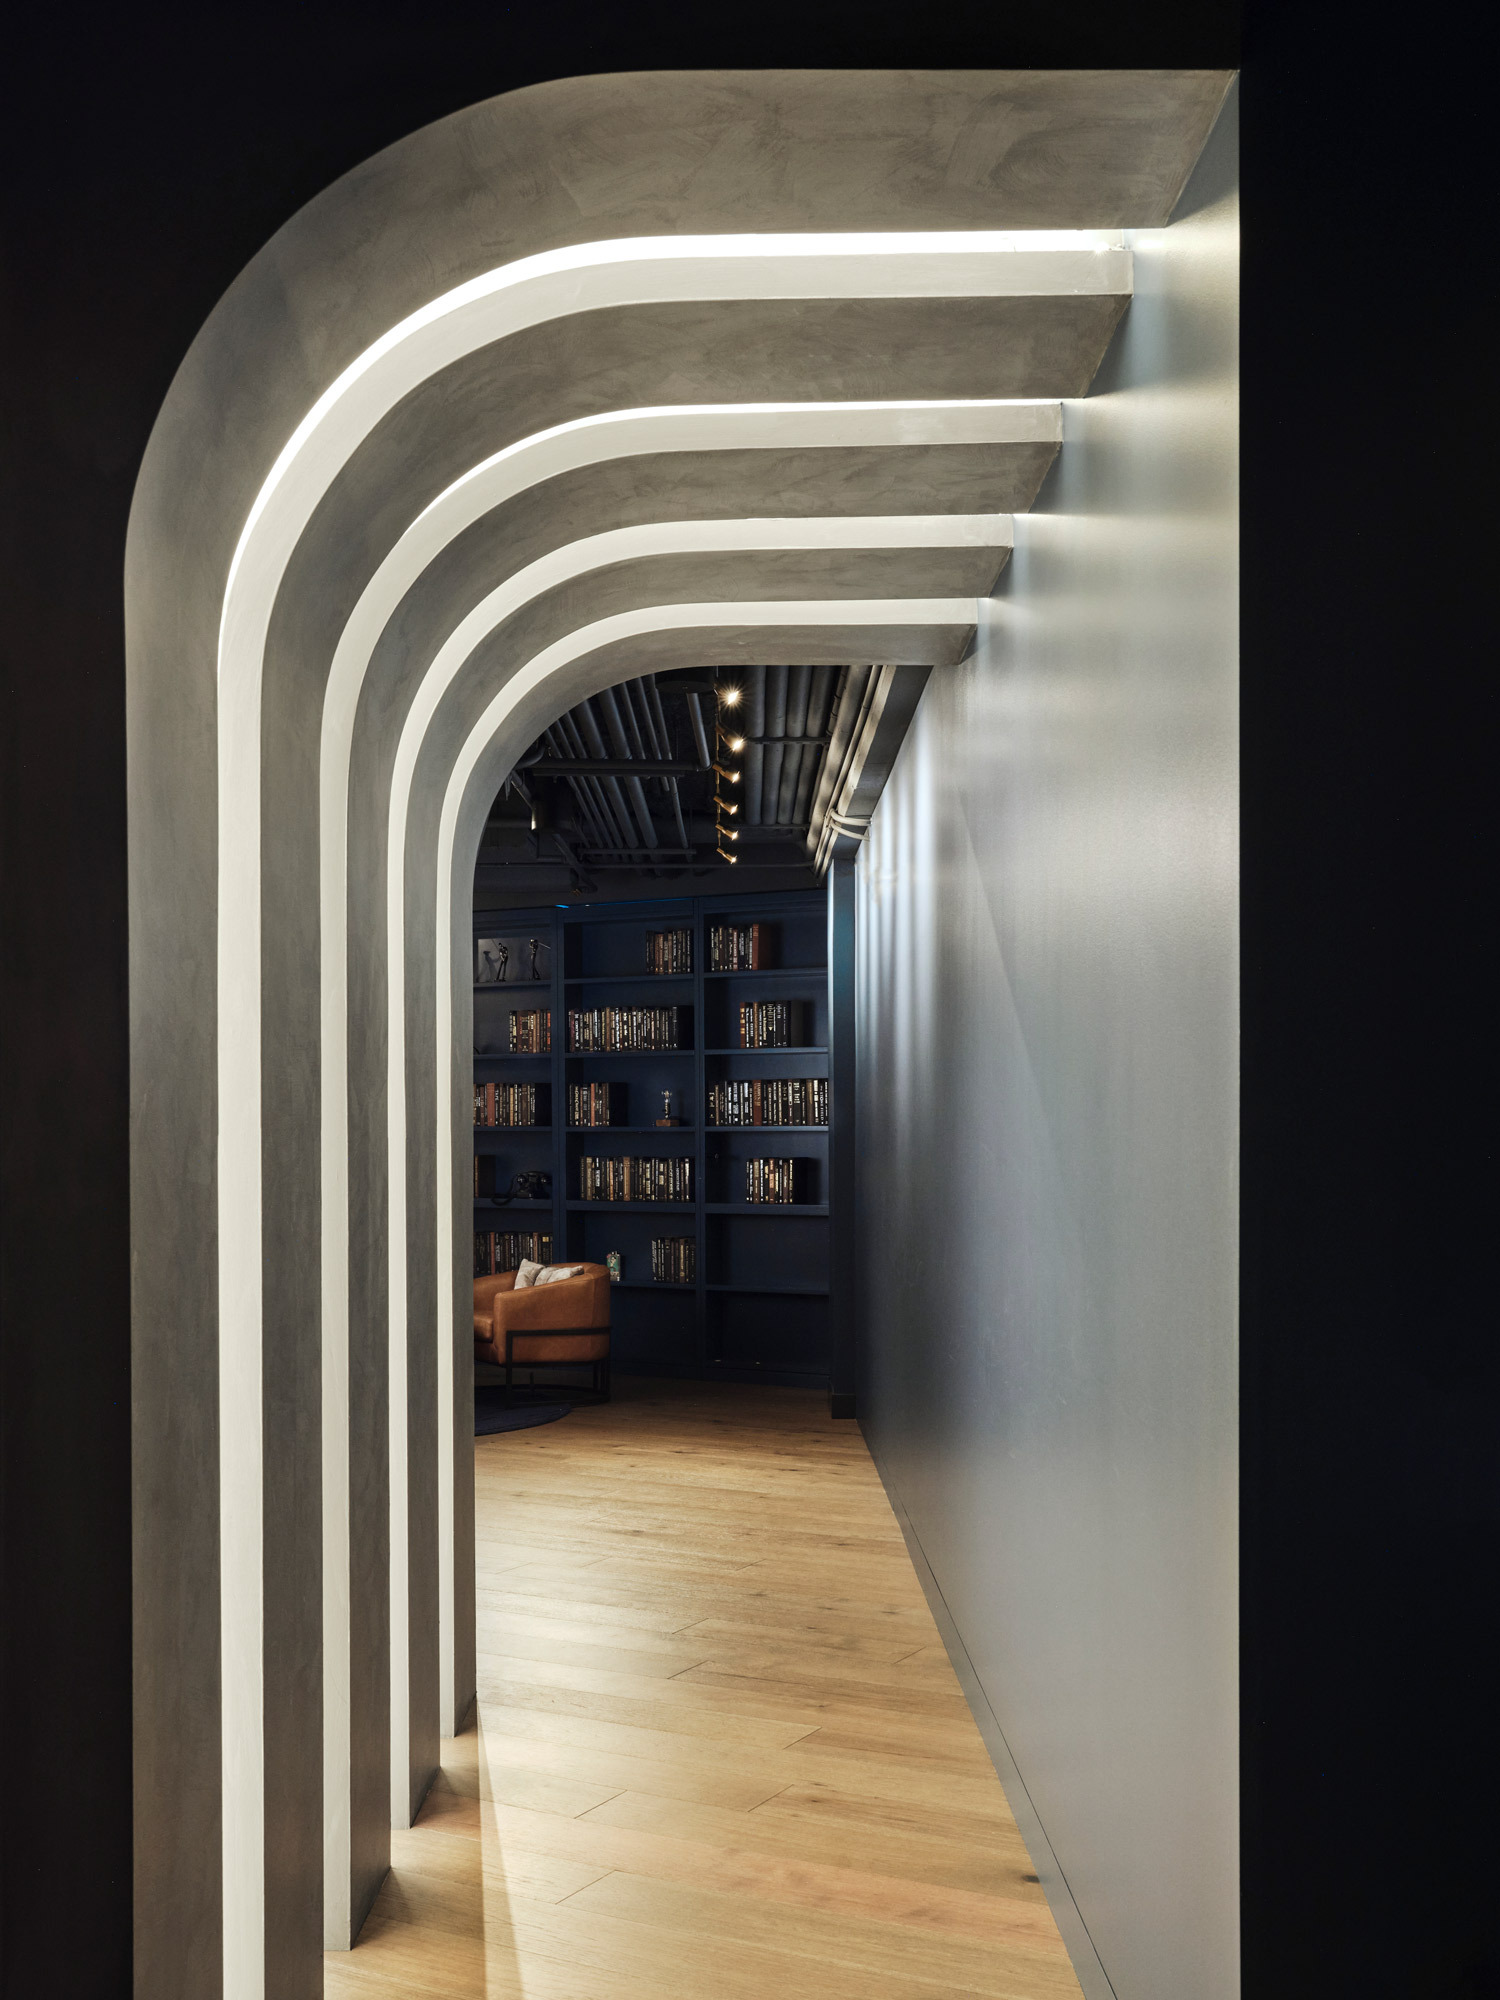 A sequence of arches with layered lighting creates a dynamic hallway contrasted against a dark-toned bookcase-lined room, leading the eye through the space with organic movement, highlighting fluidity and depth in contemporary interior design.